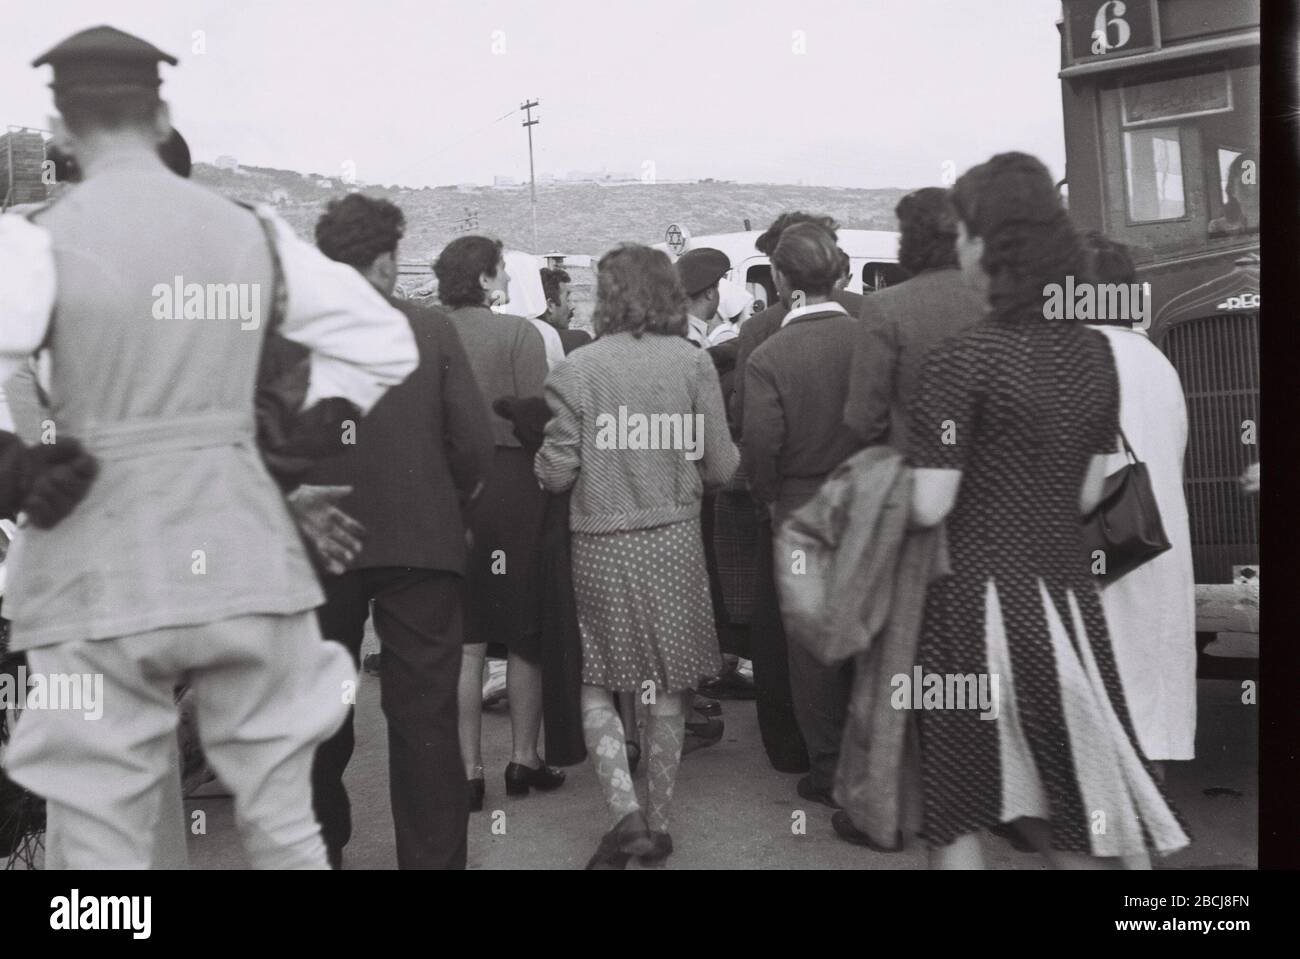 English Immigrants Being Transferred By Train From The Haifa Port To The Reception Camp At Atlit I U O U O I C O U U U O O U E U U O O I U O E I O I E U U O I I I U O U E